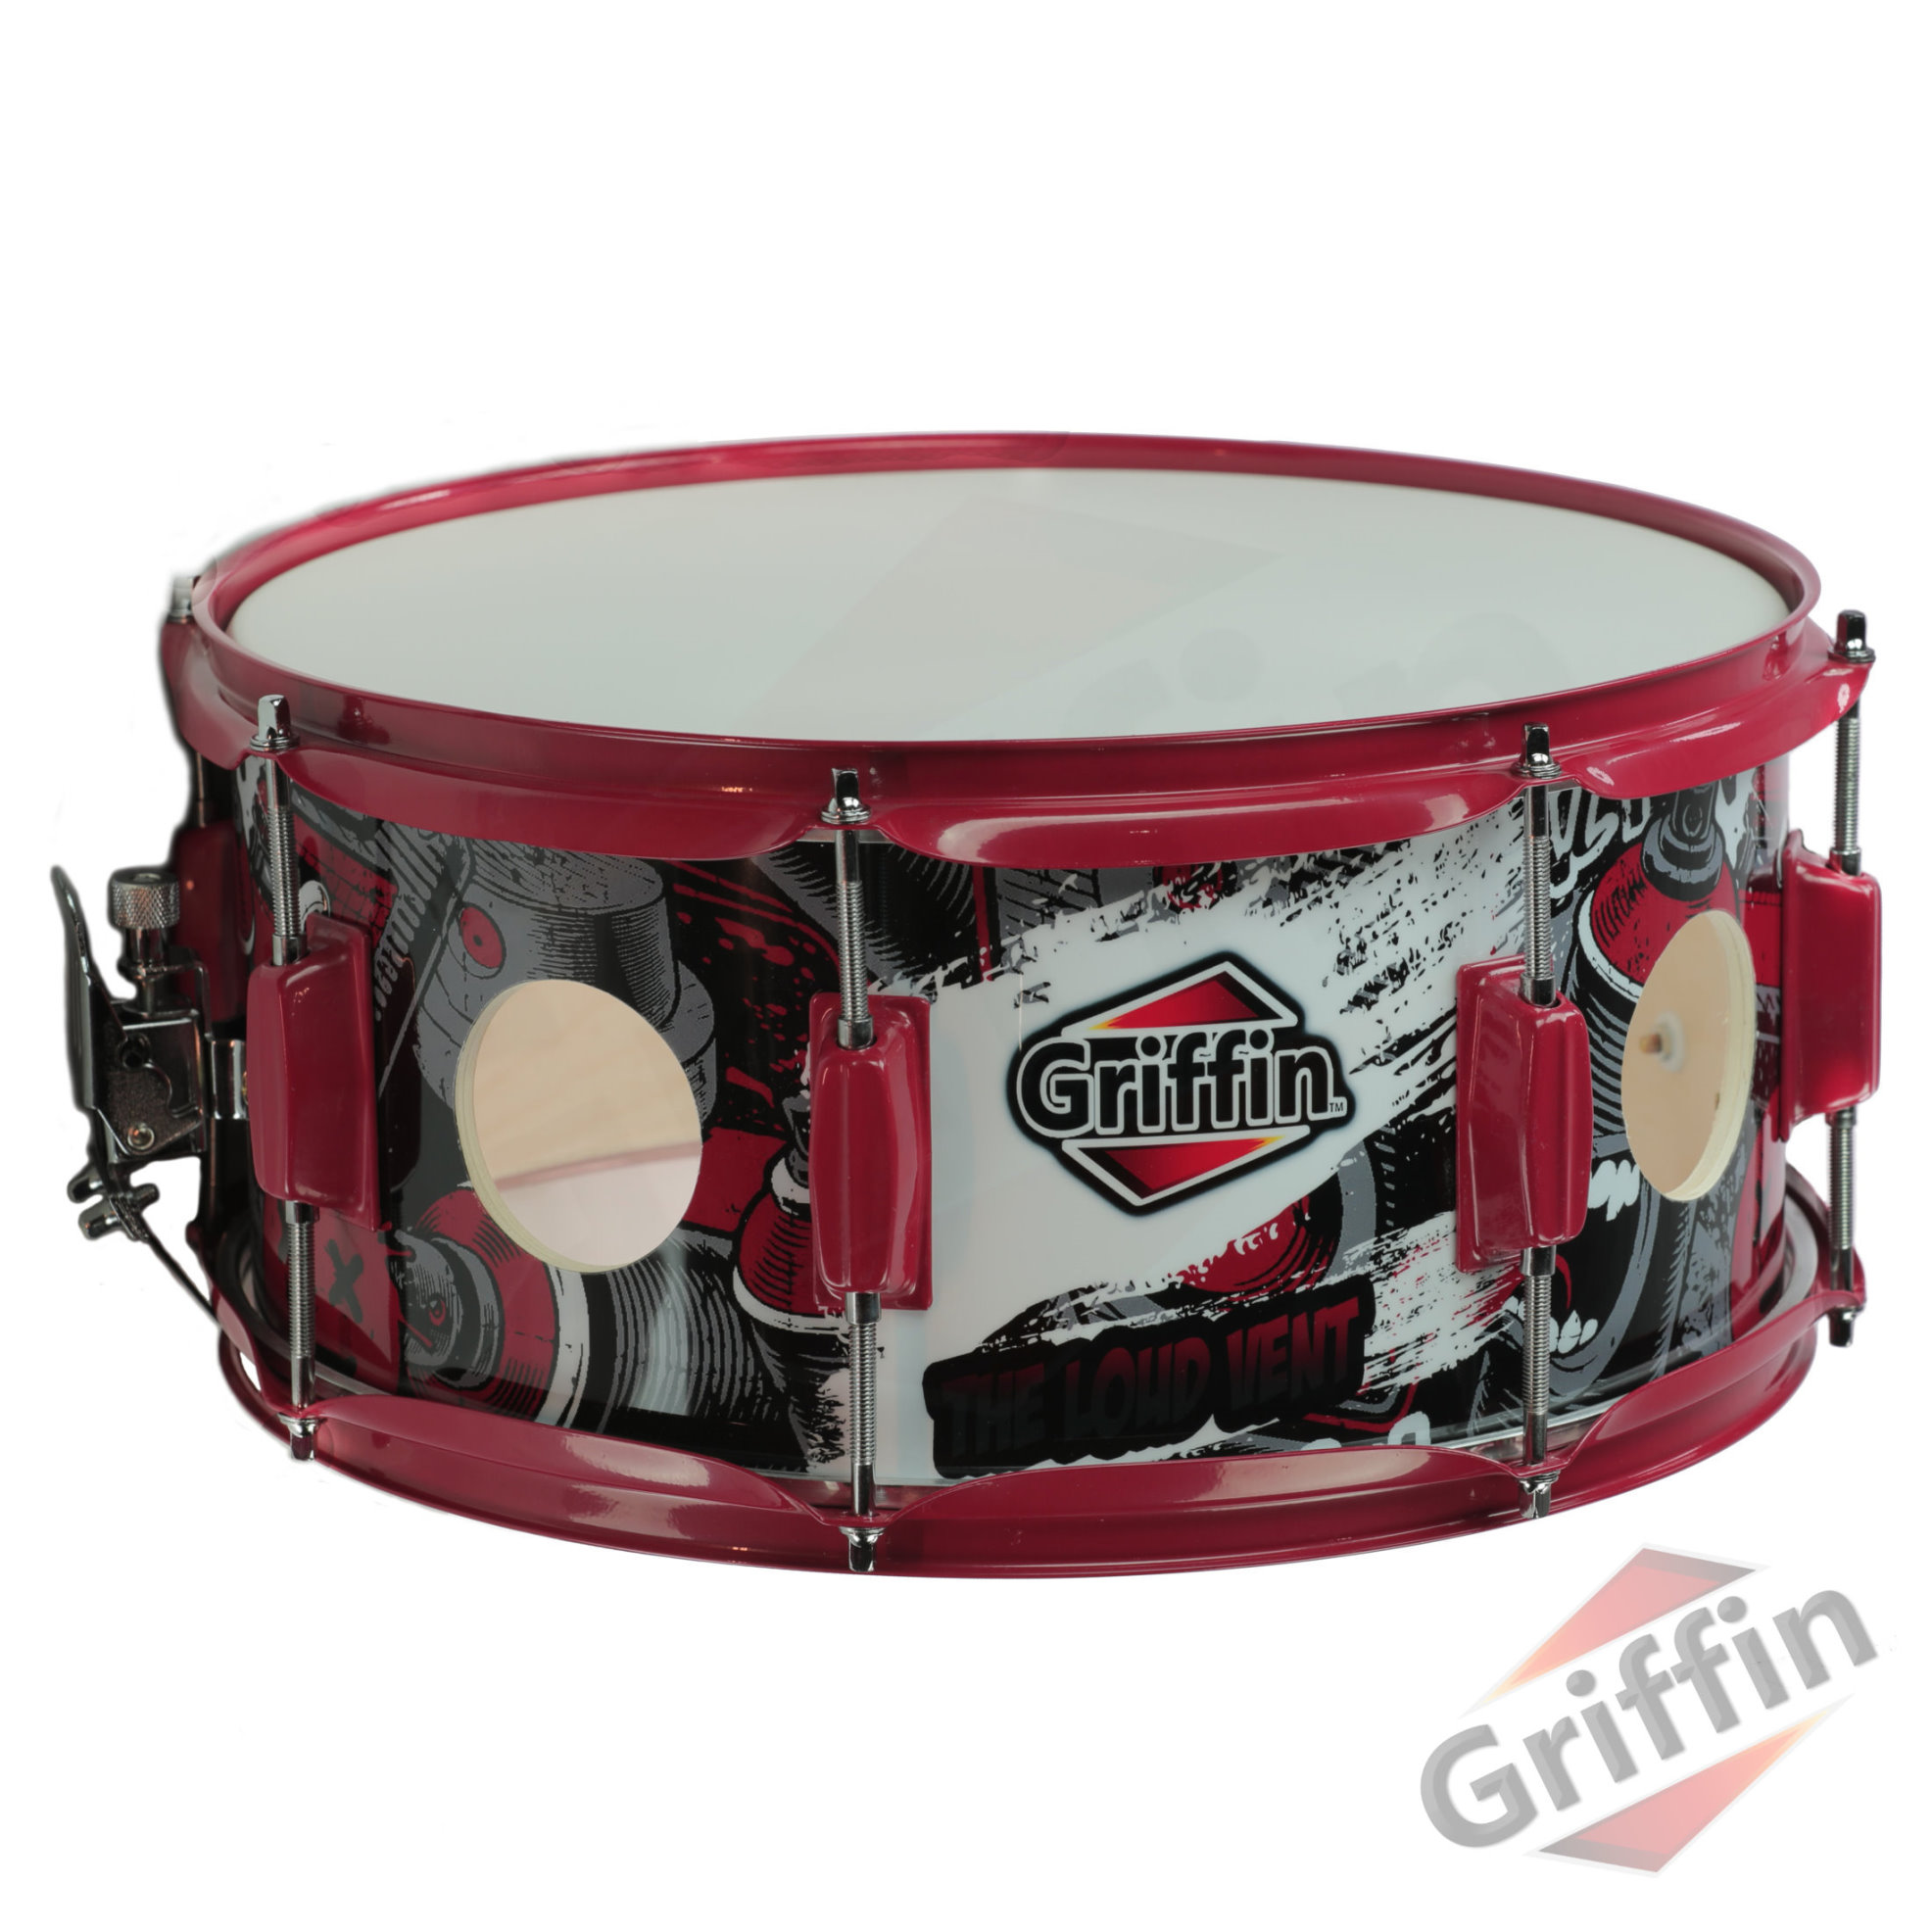 Birch Wood Shell Snare Drum by Griffin 14″ x 6.5″ – Oversize 2.5″ Vents